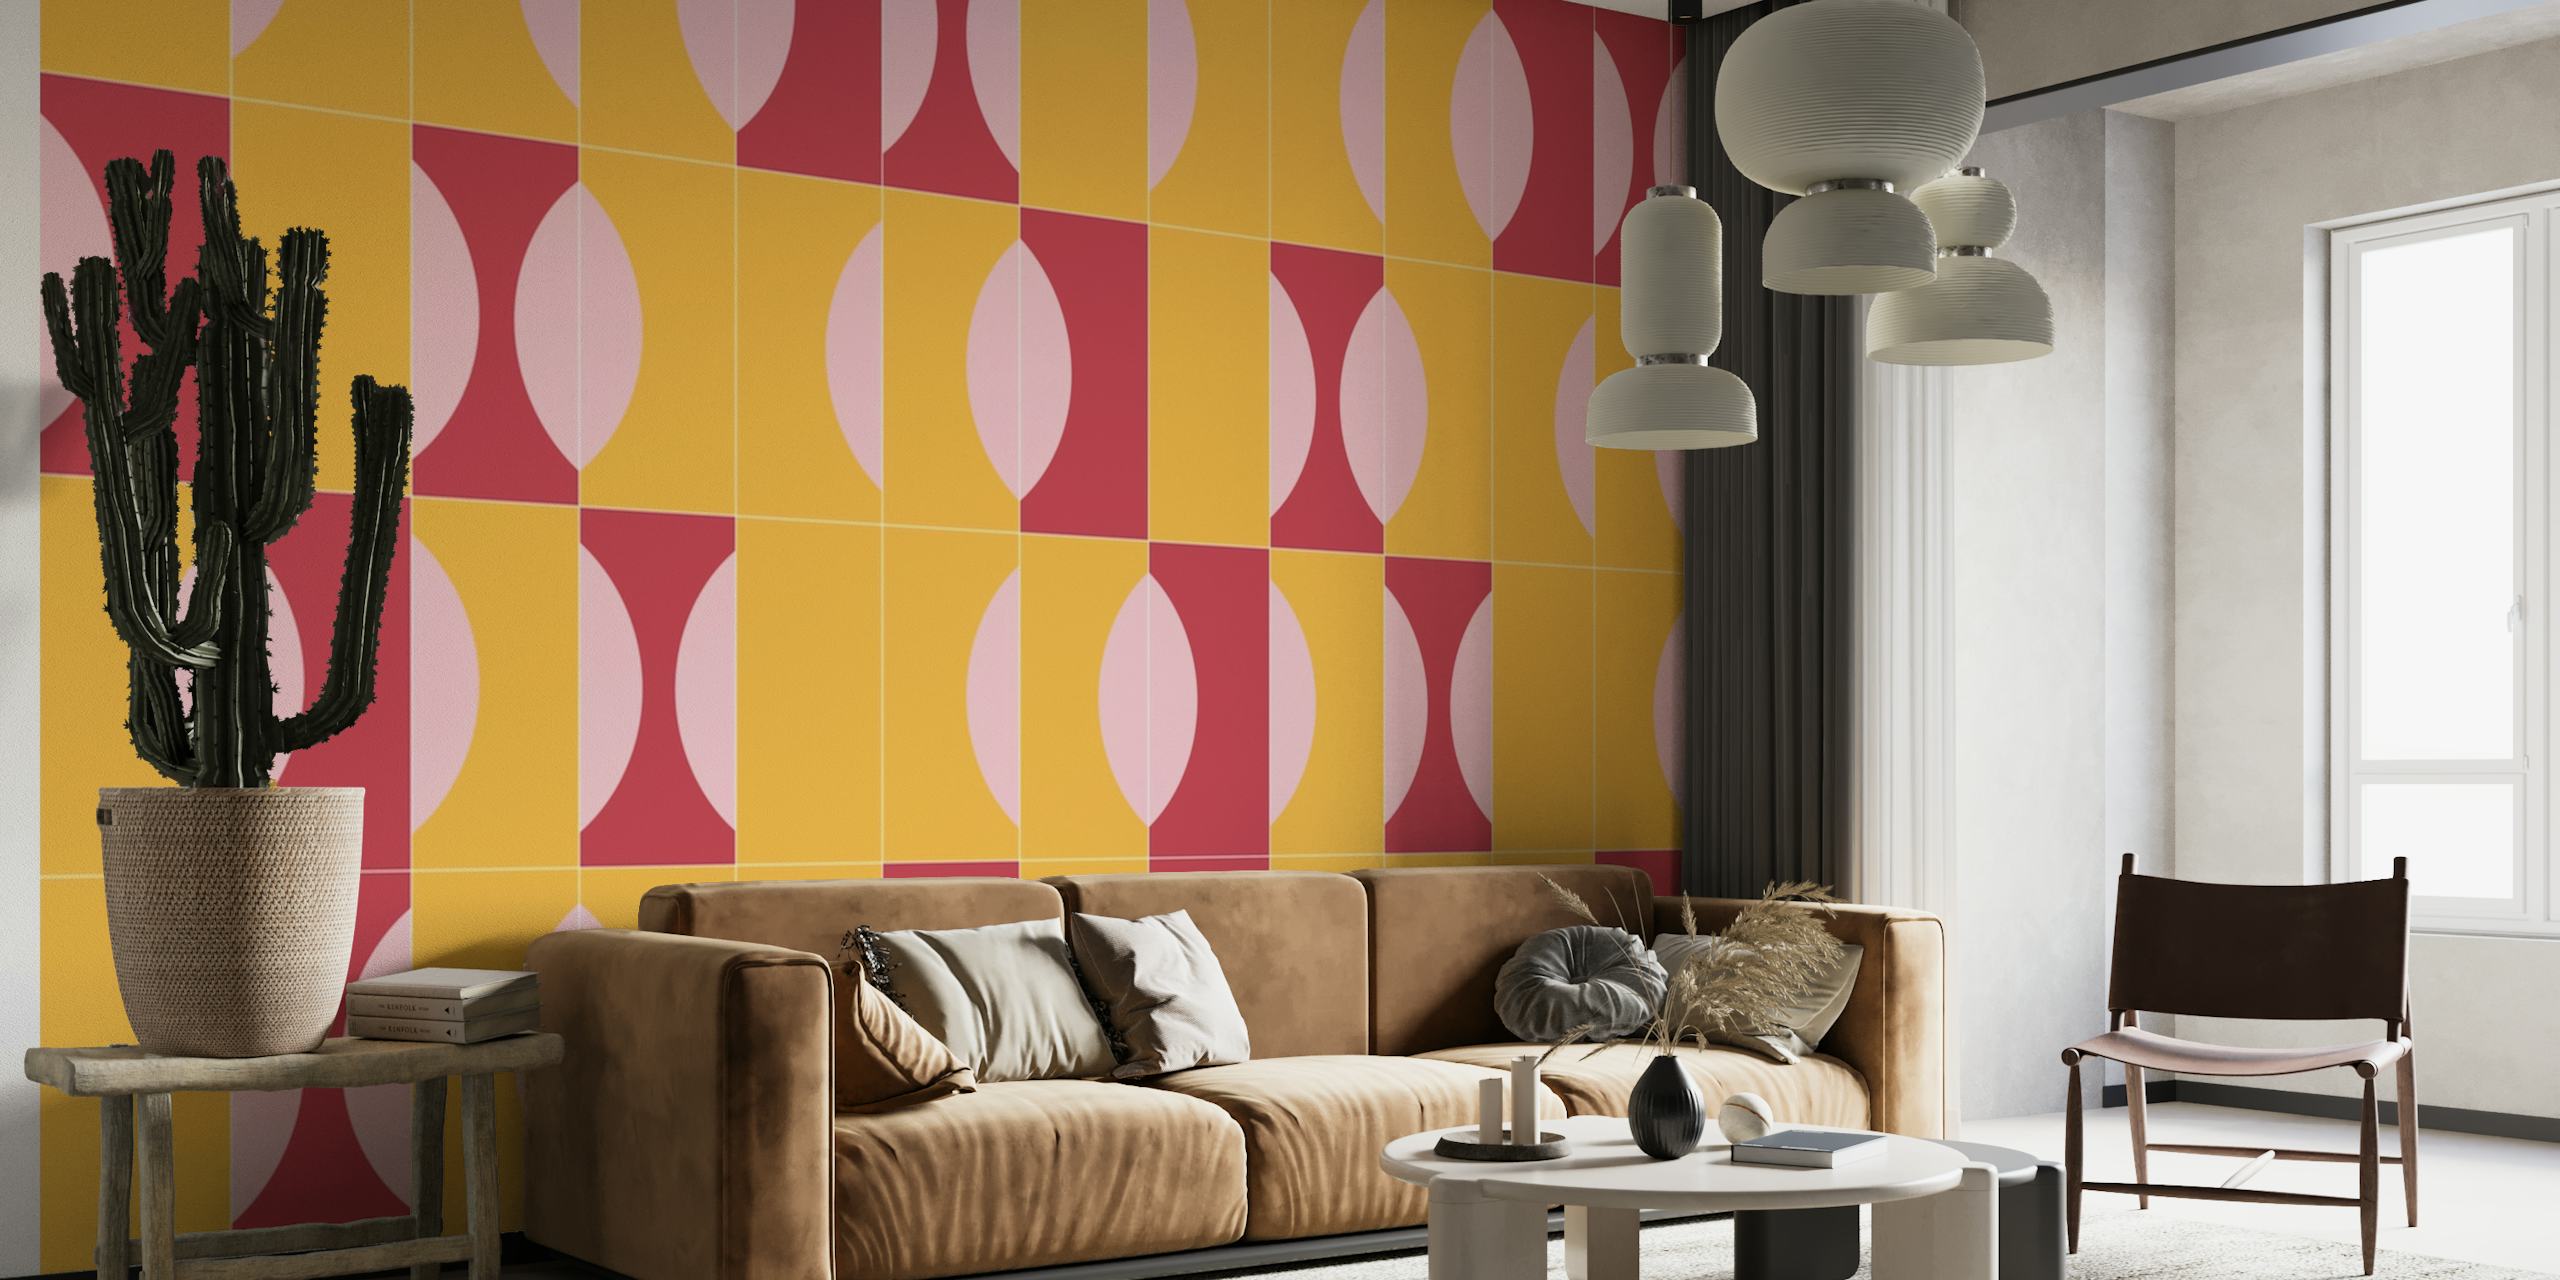 Abstract Sunny Tiles 03 wall mural featuring geometric shapes in orange, pink, and lavender tones